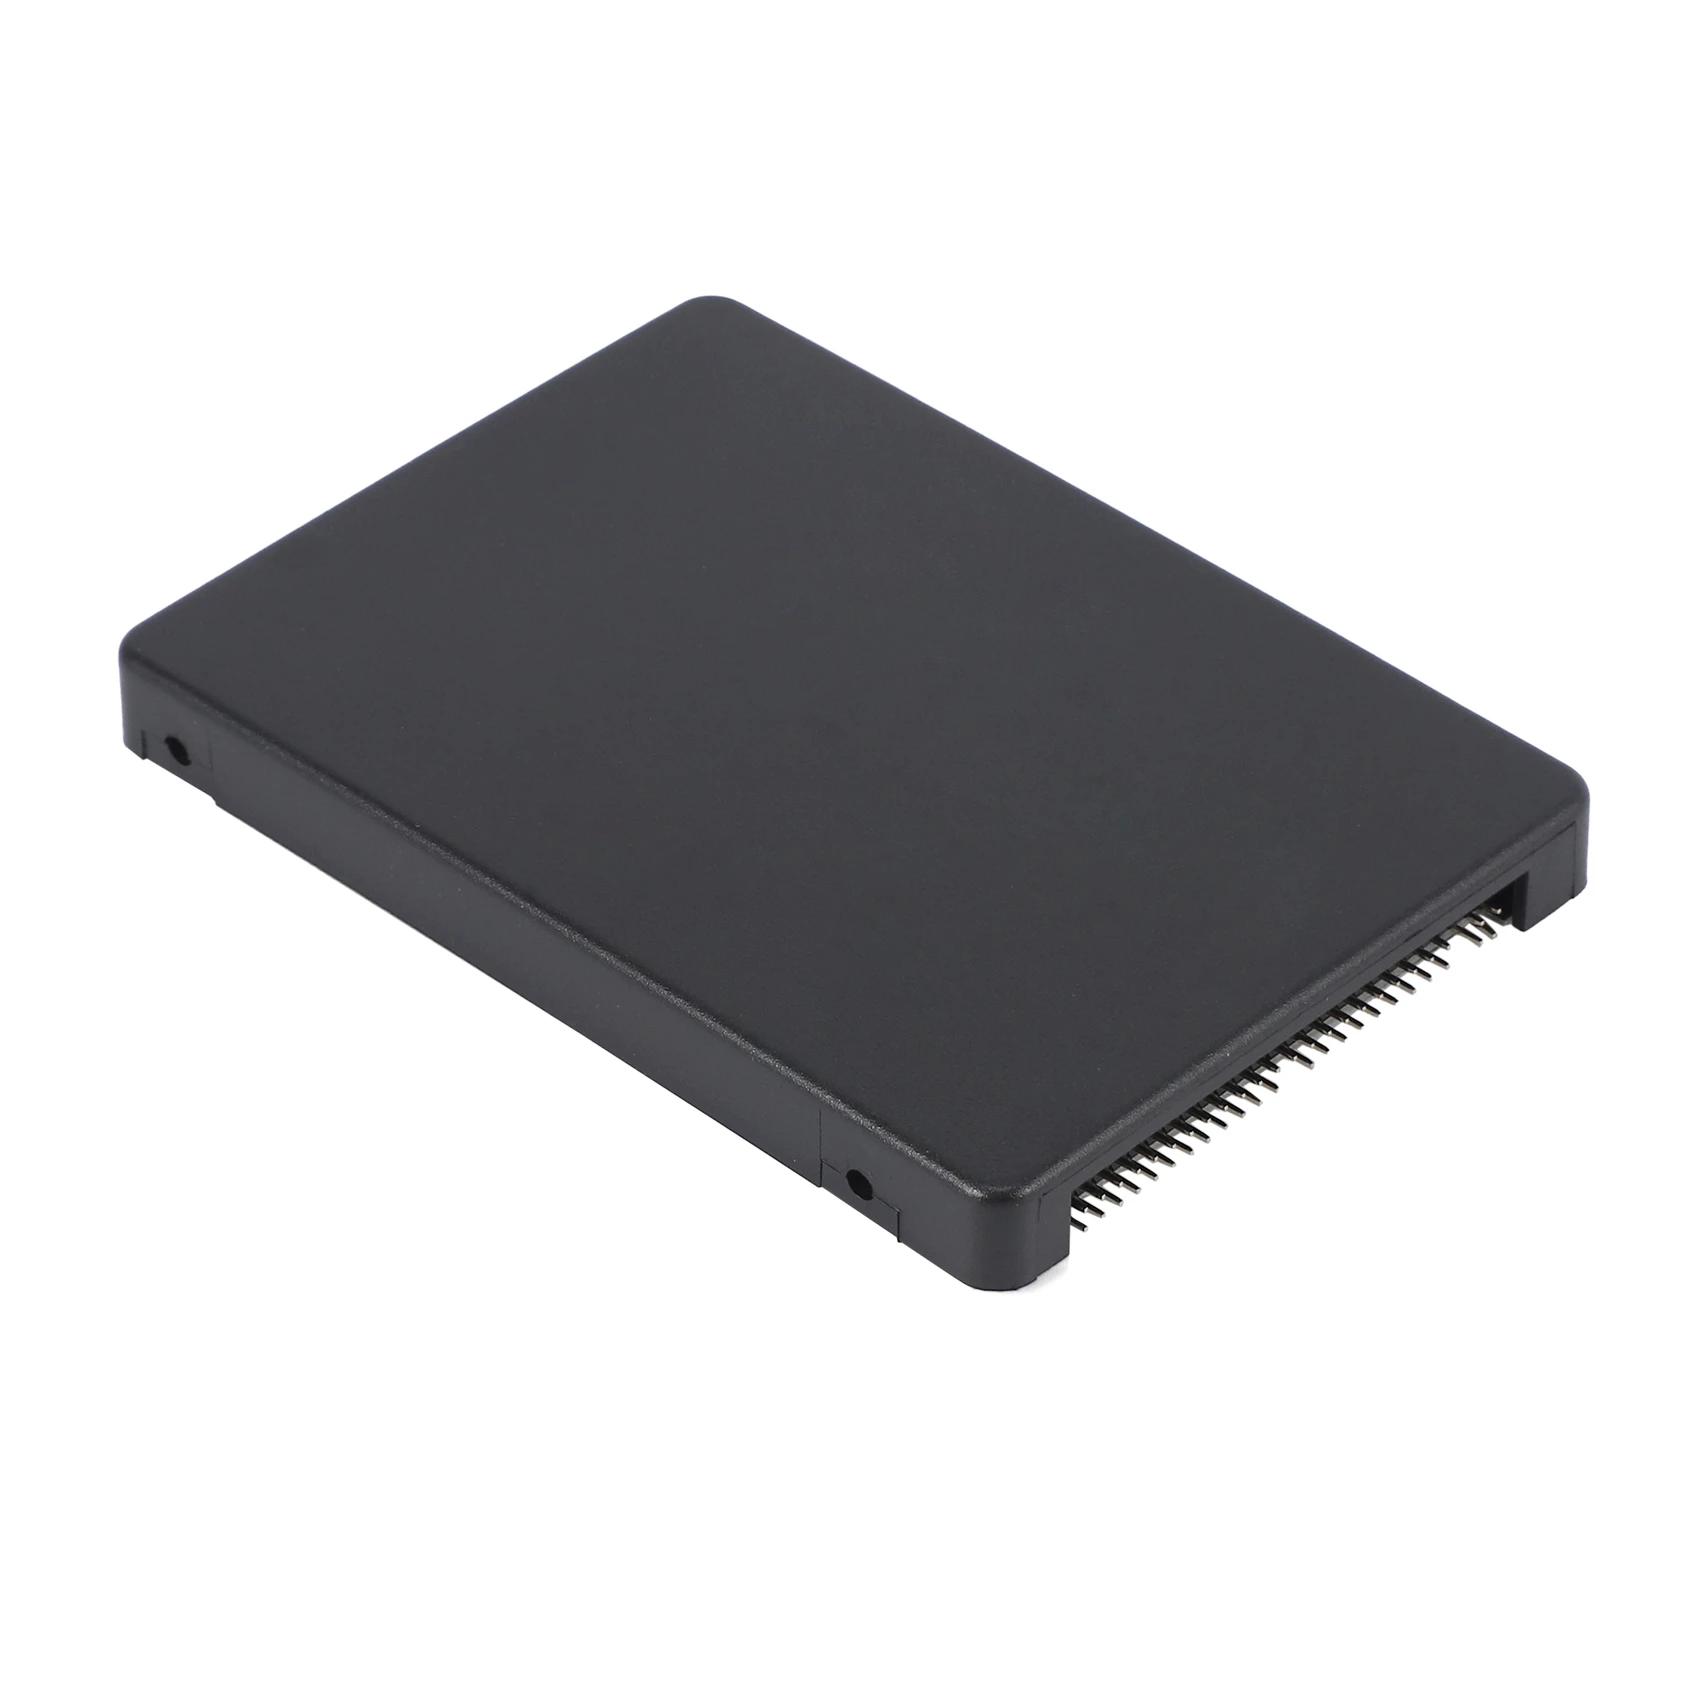 

44PIN MSATA To 2.5 Inch IDE HDD SSD MSATA To PATA Adapter Converter Card with Case